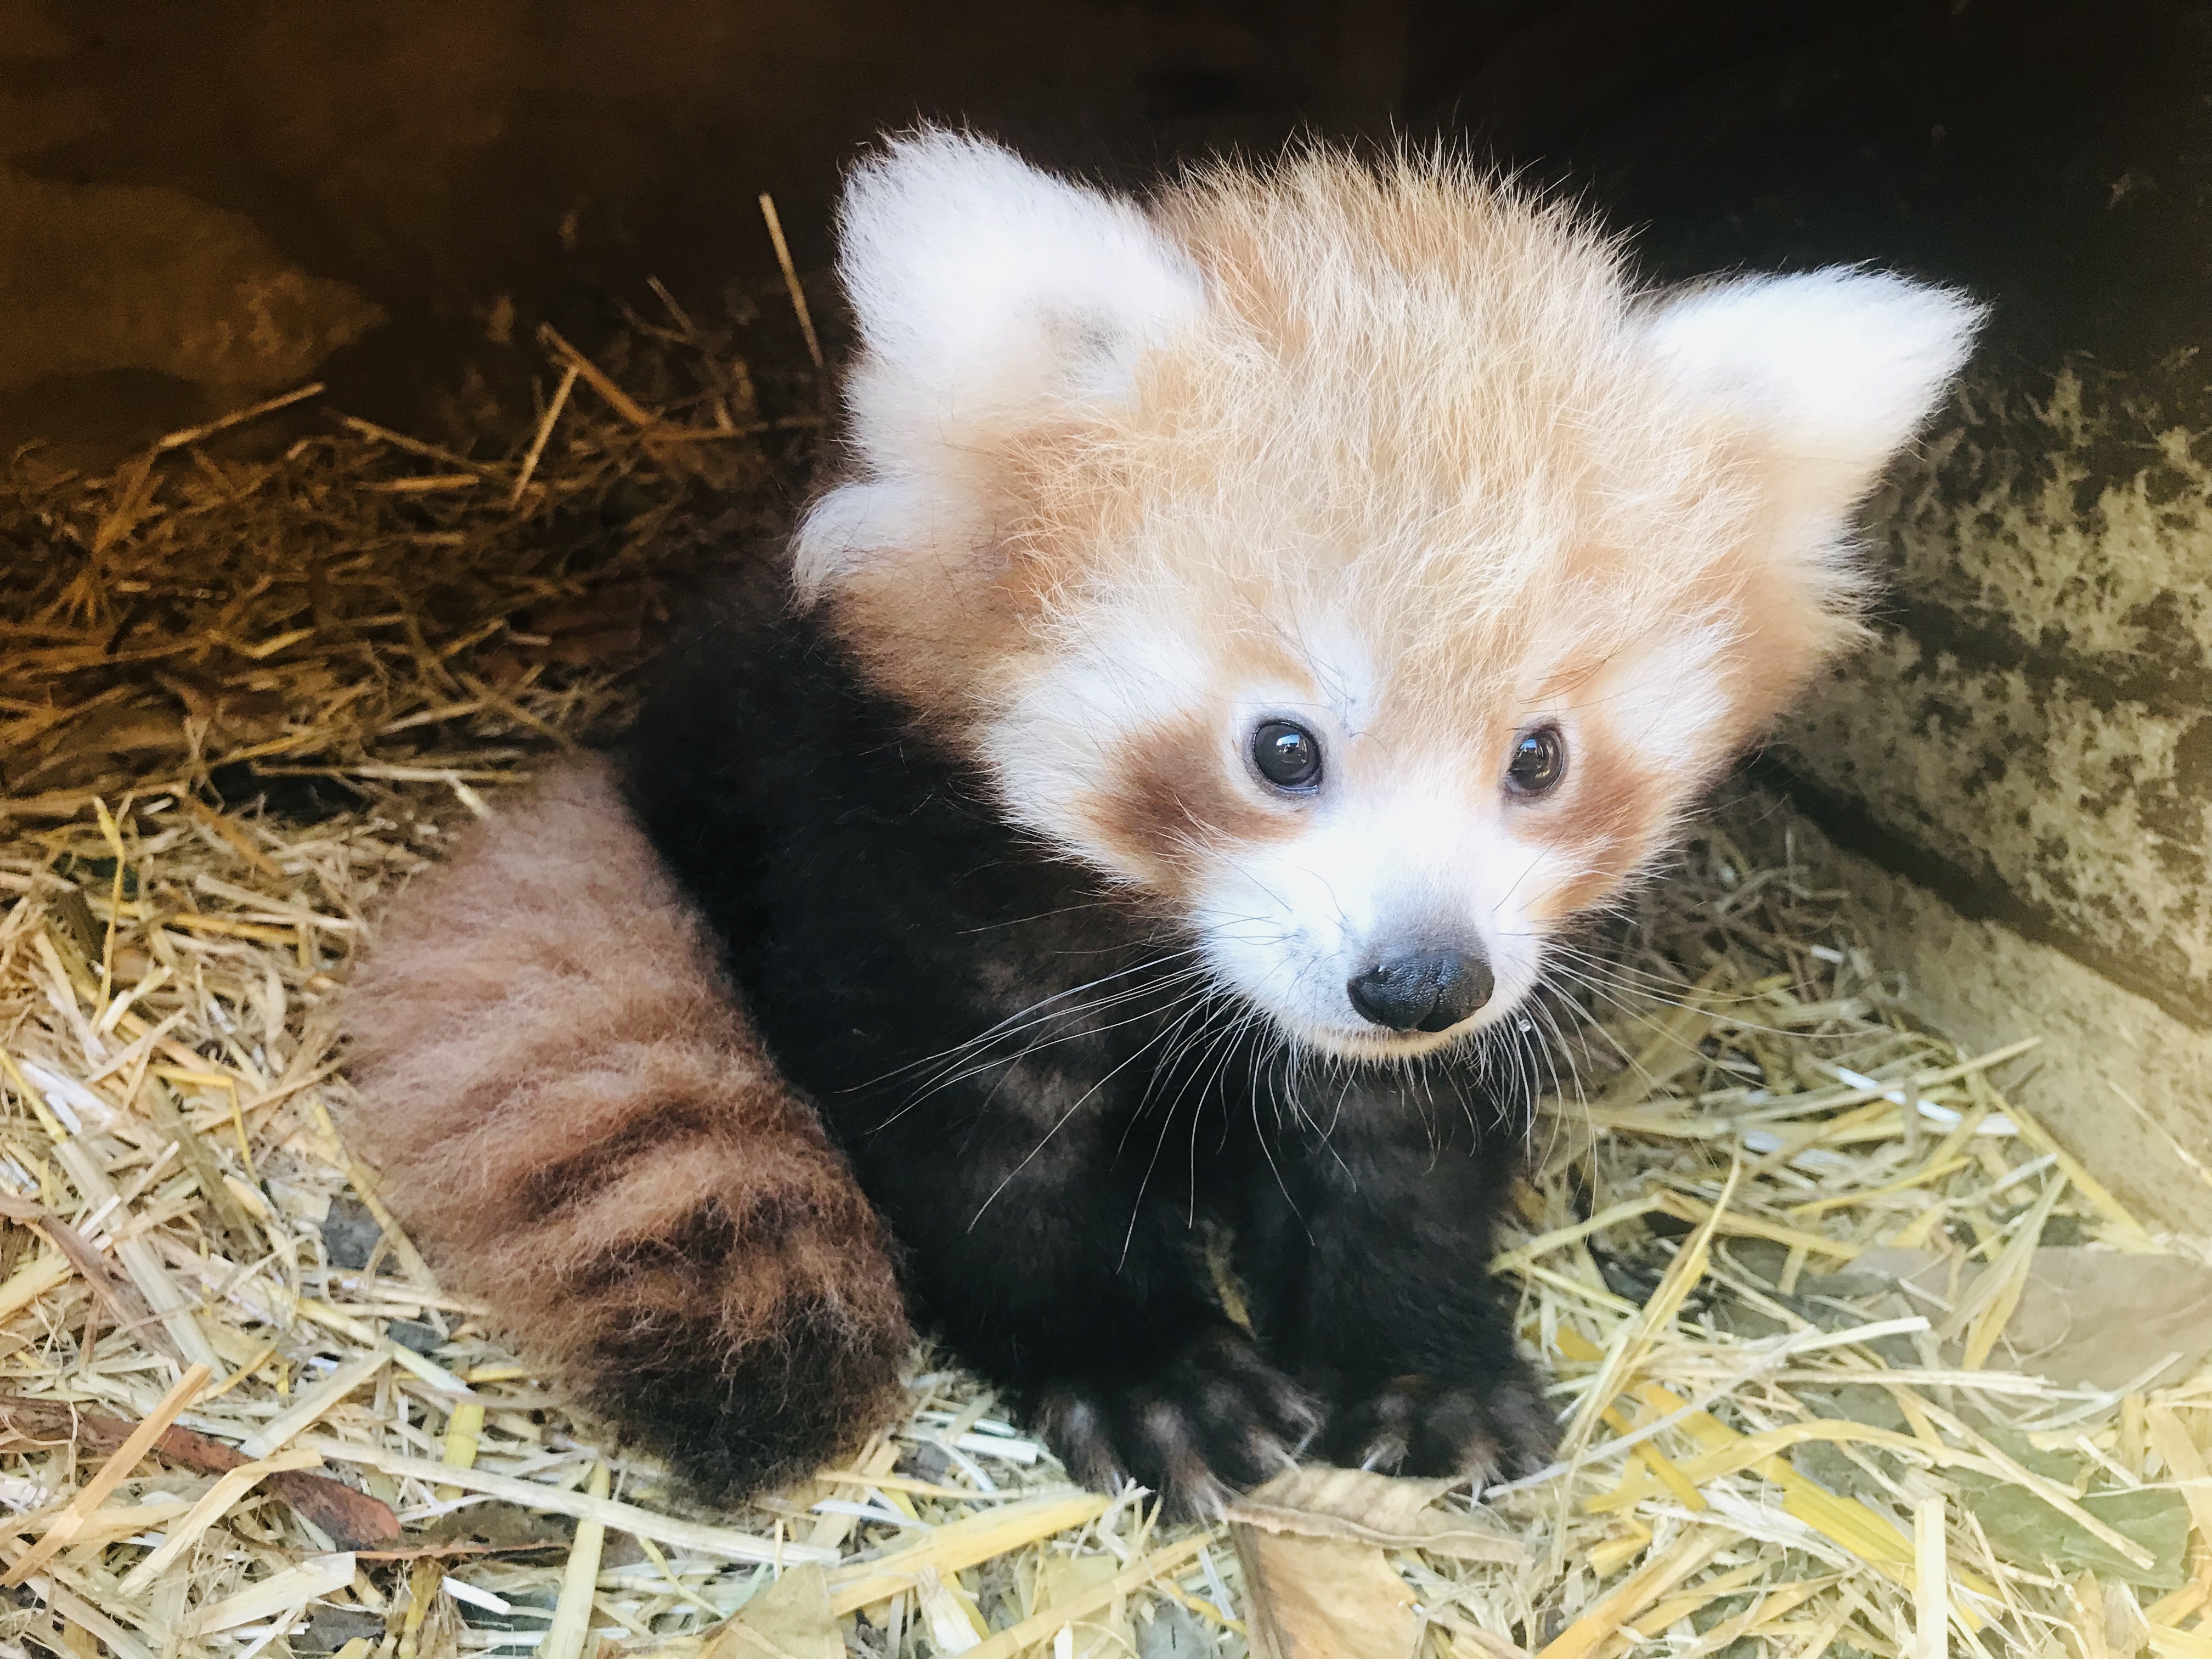 Matchmaking red pandas to save the species